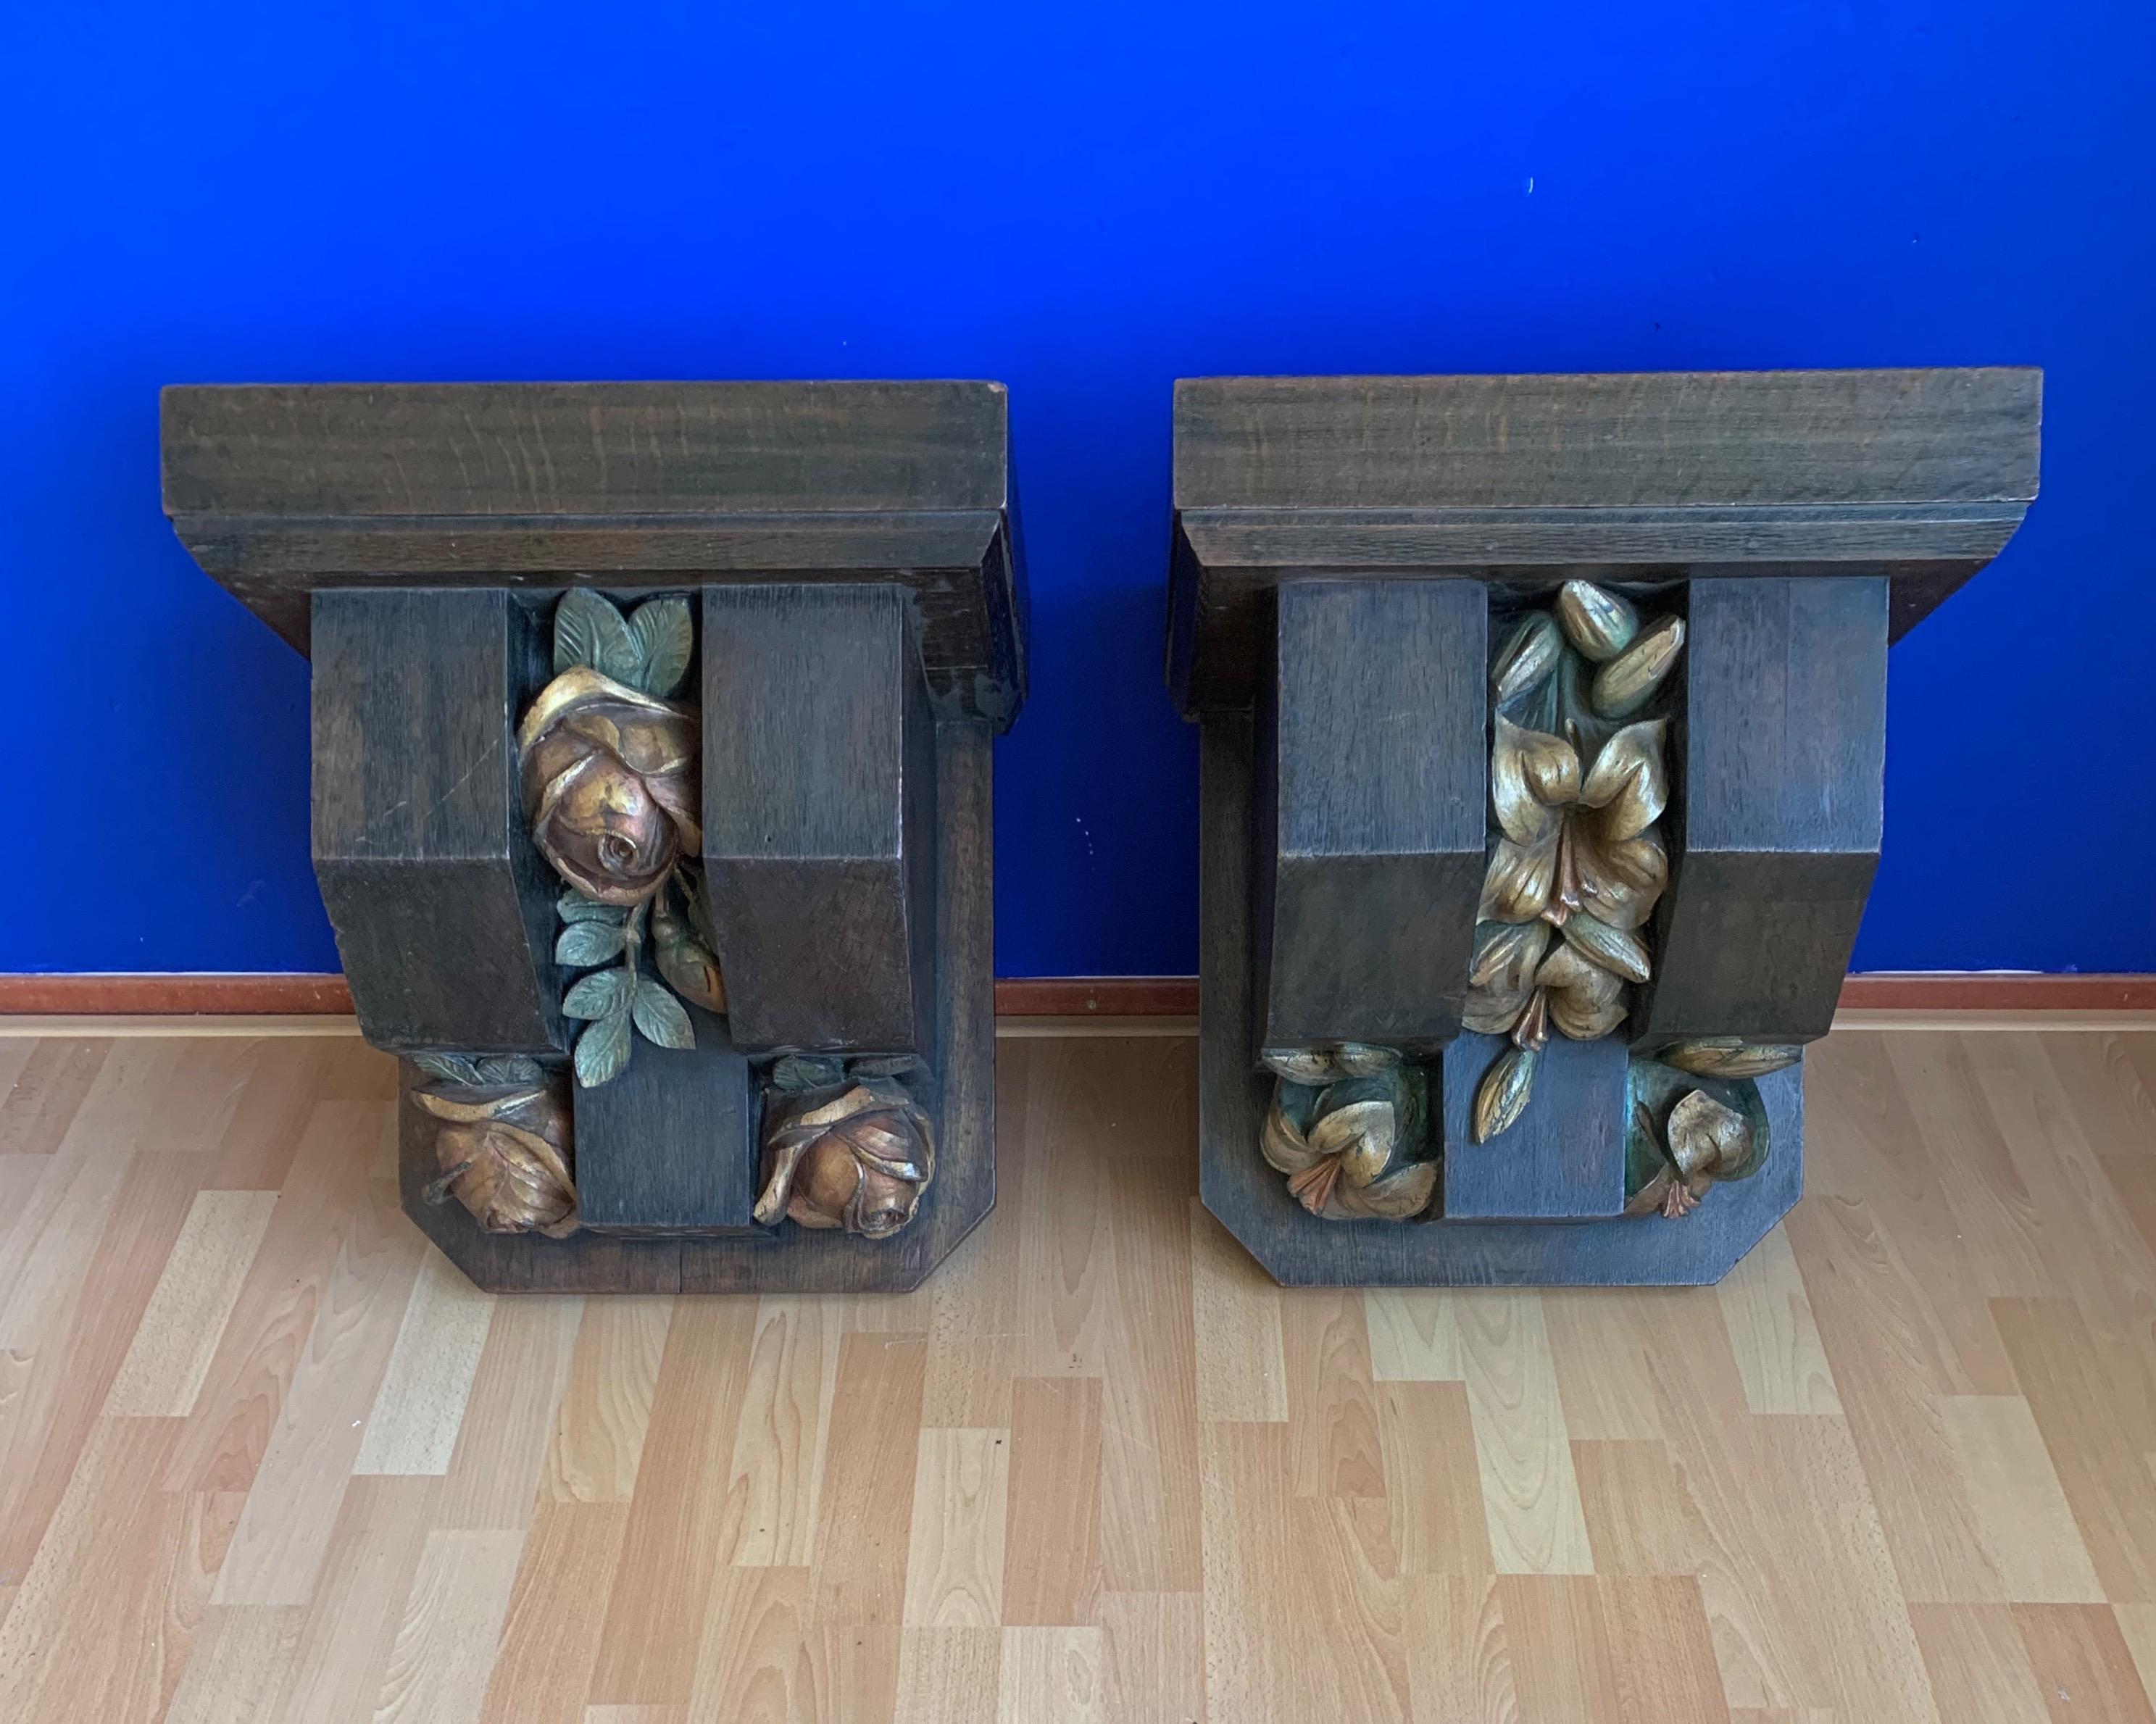 These stunning display brackets or consoles are unique in size and design.

We have sold our share of wall brackets over the years, but this recently acquired pair is definitely among the largest and most impressive. They are made of solid oak and